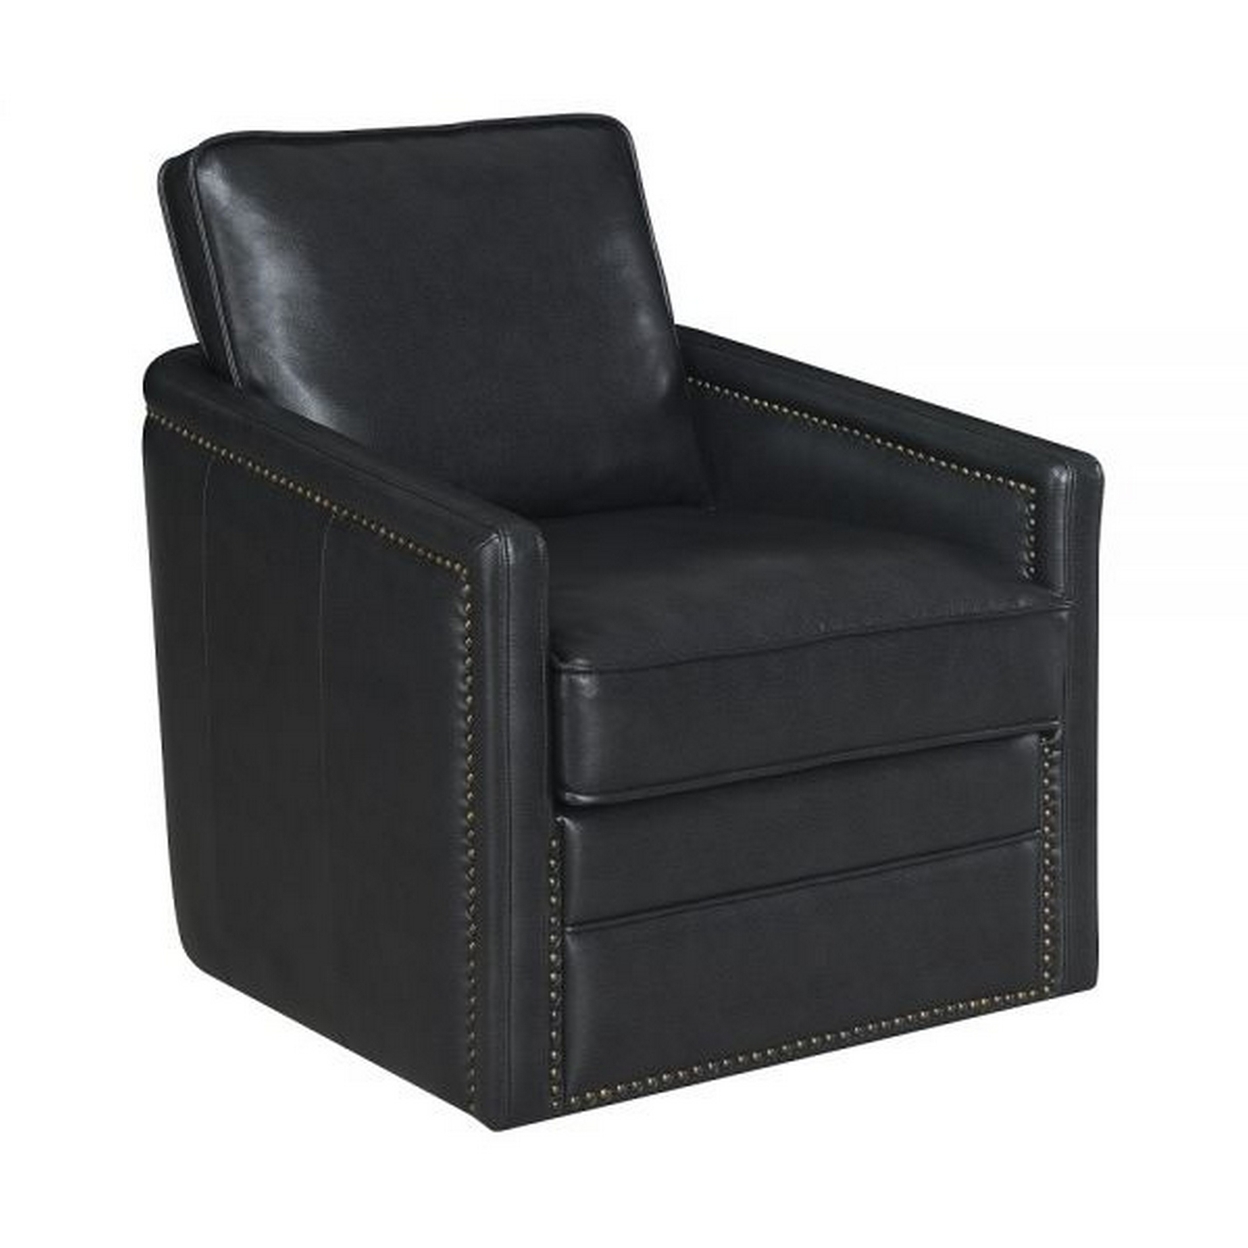 Roco 34 Inch Accent Chair With Swivel, Faux Leather Upholstery, Black - Saltoro Sherpi